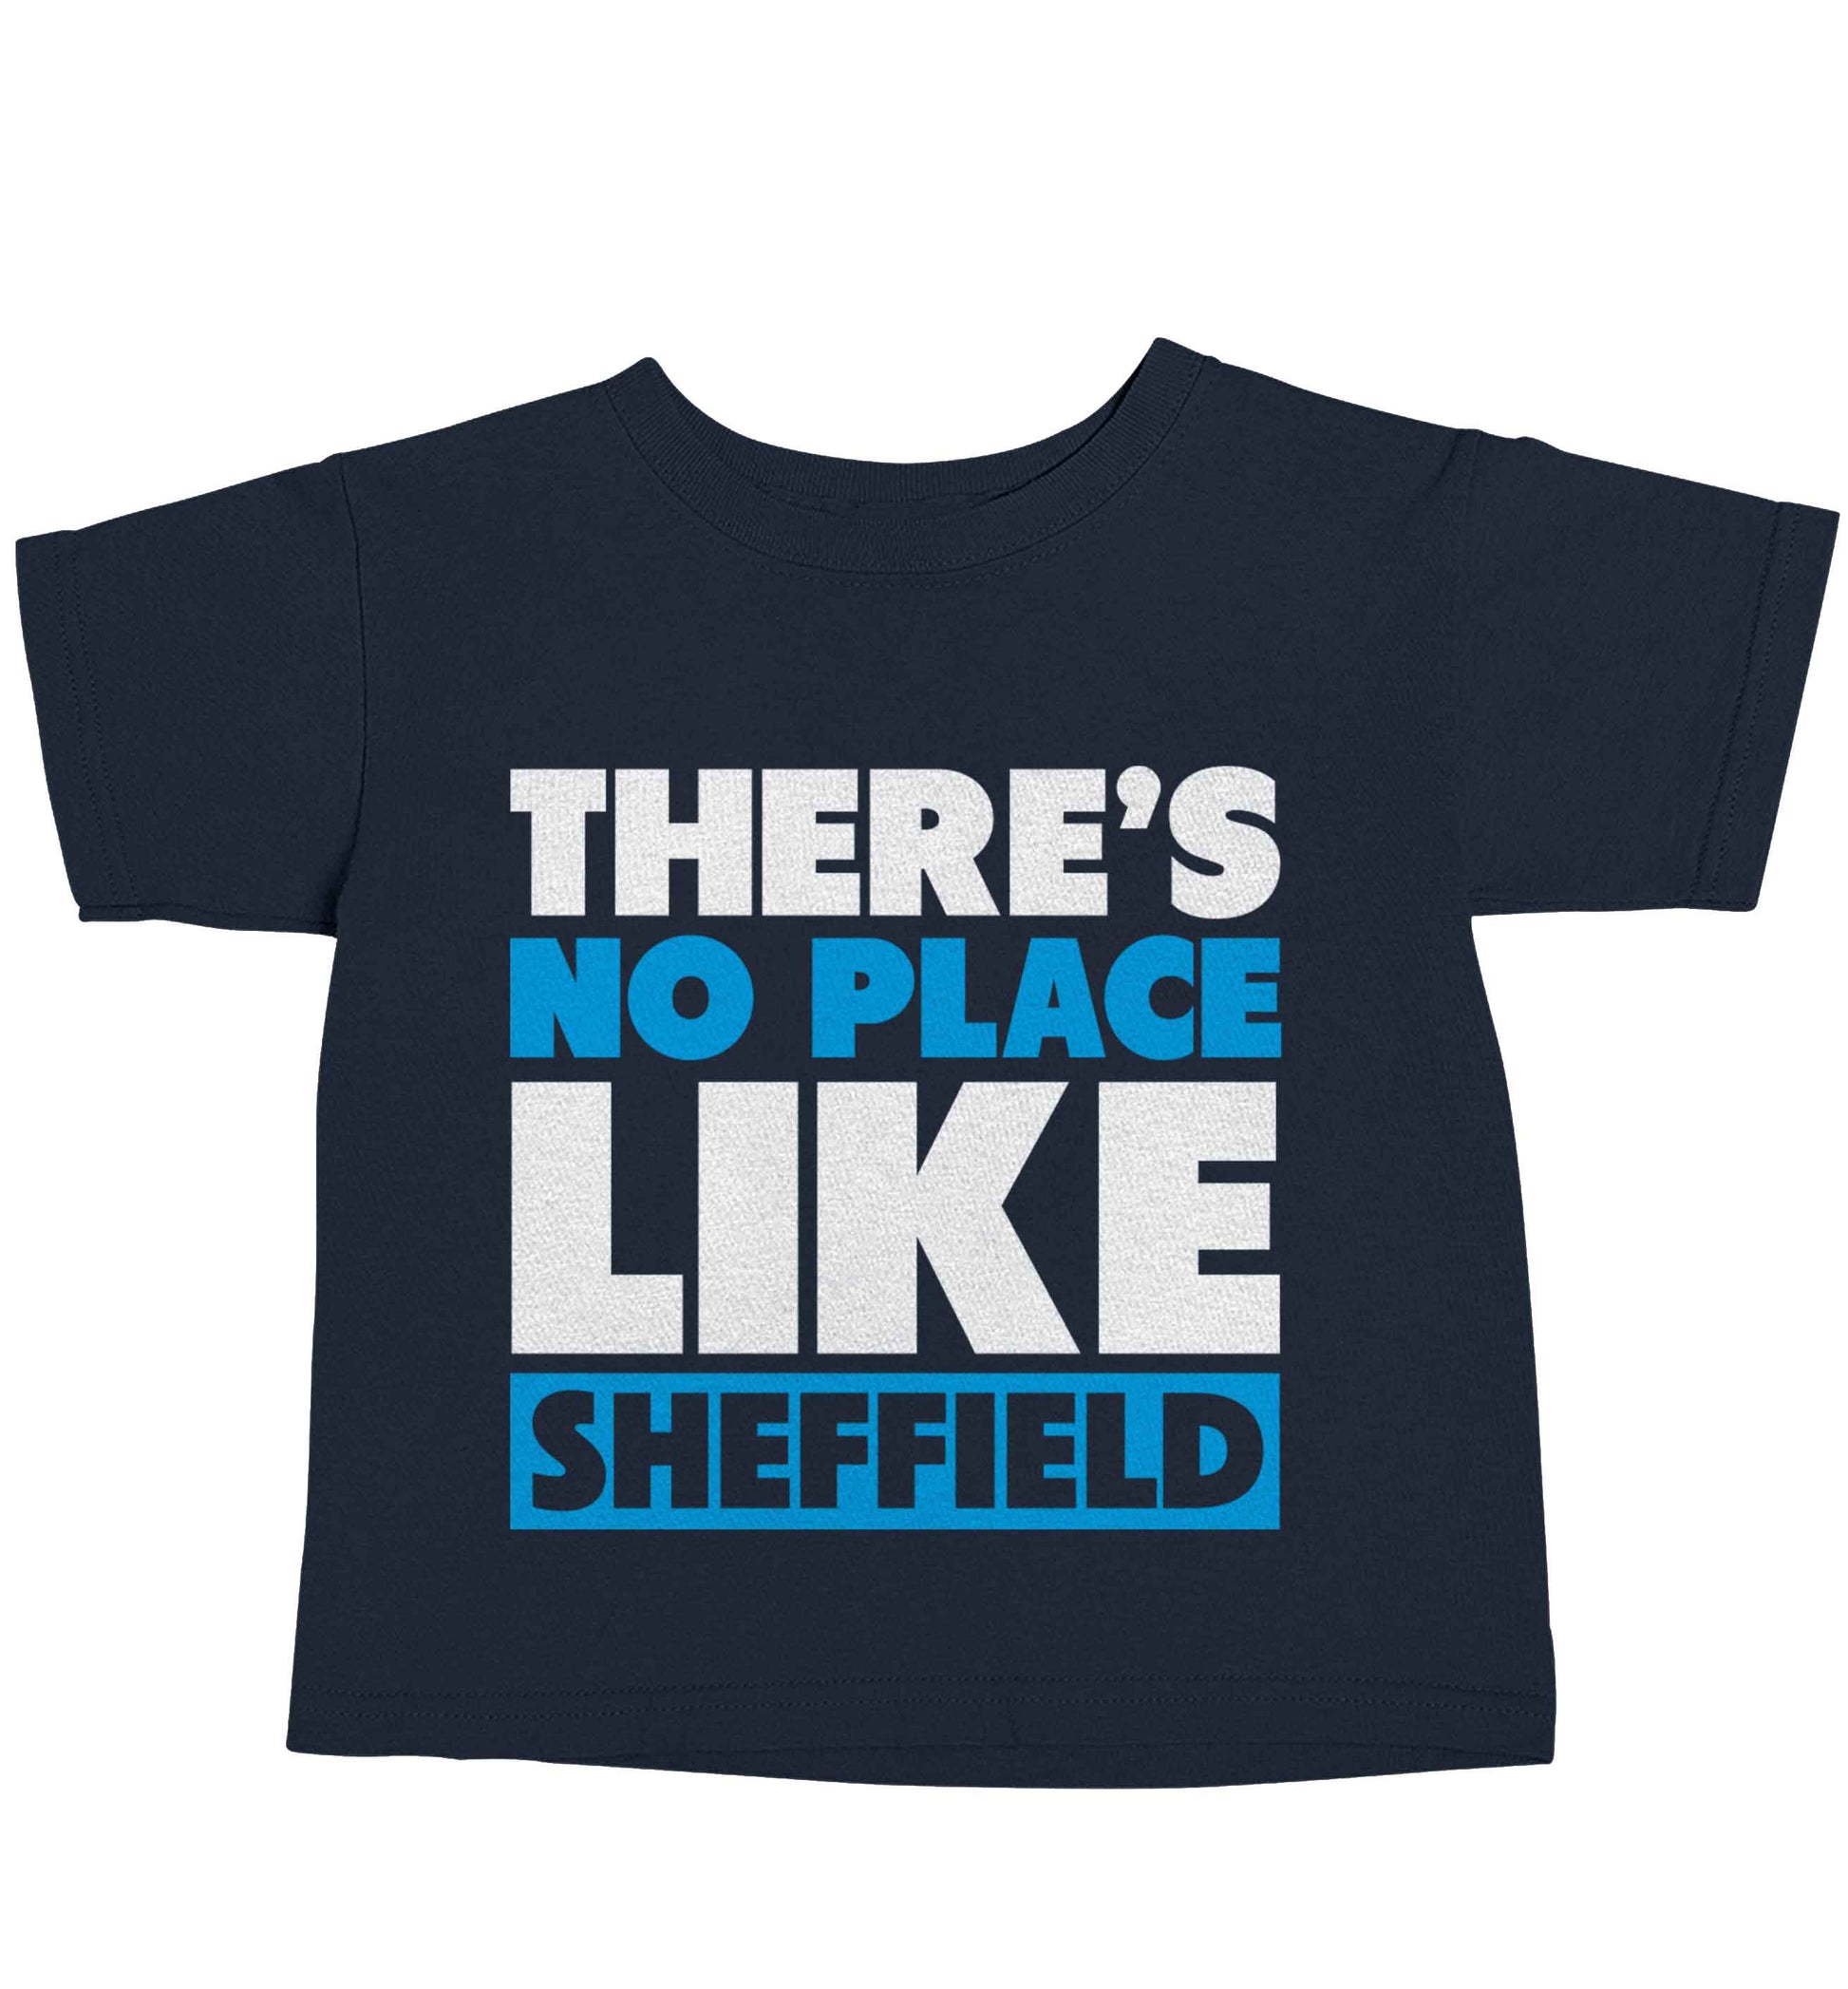 There's no place like Sheffield navy baby toddler Tshirt 2 Years